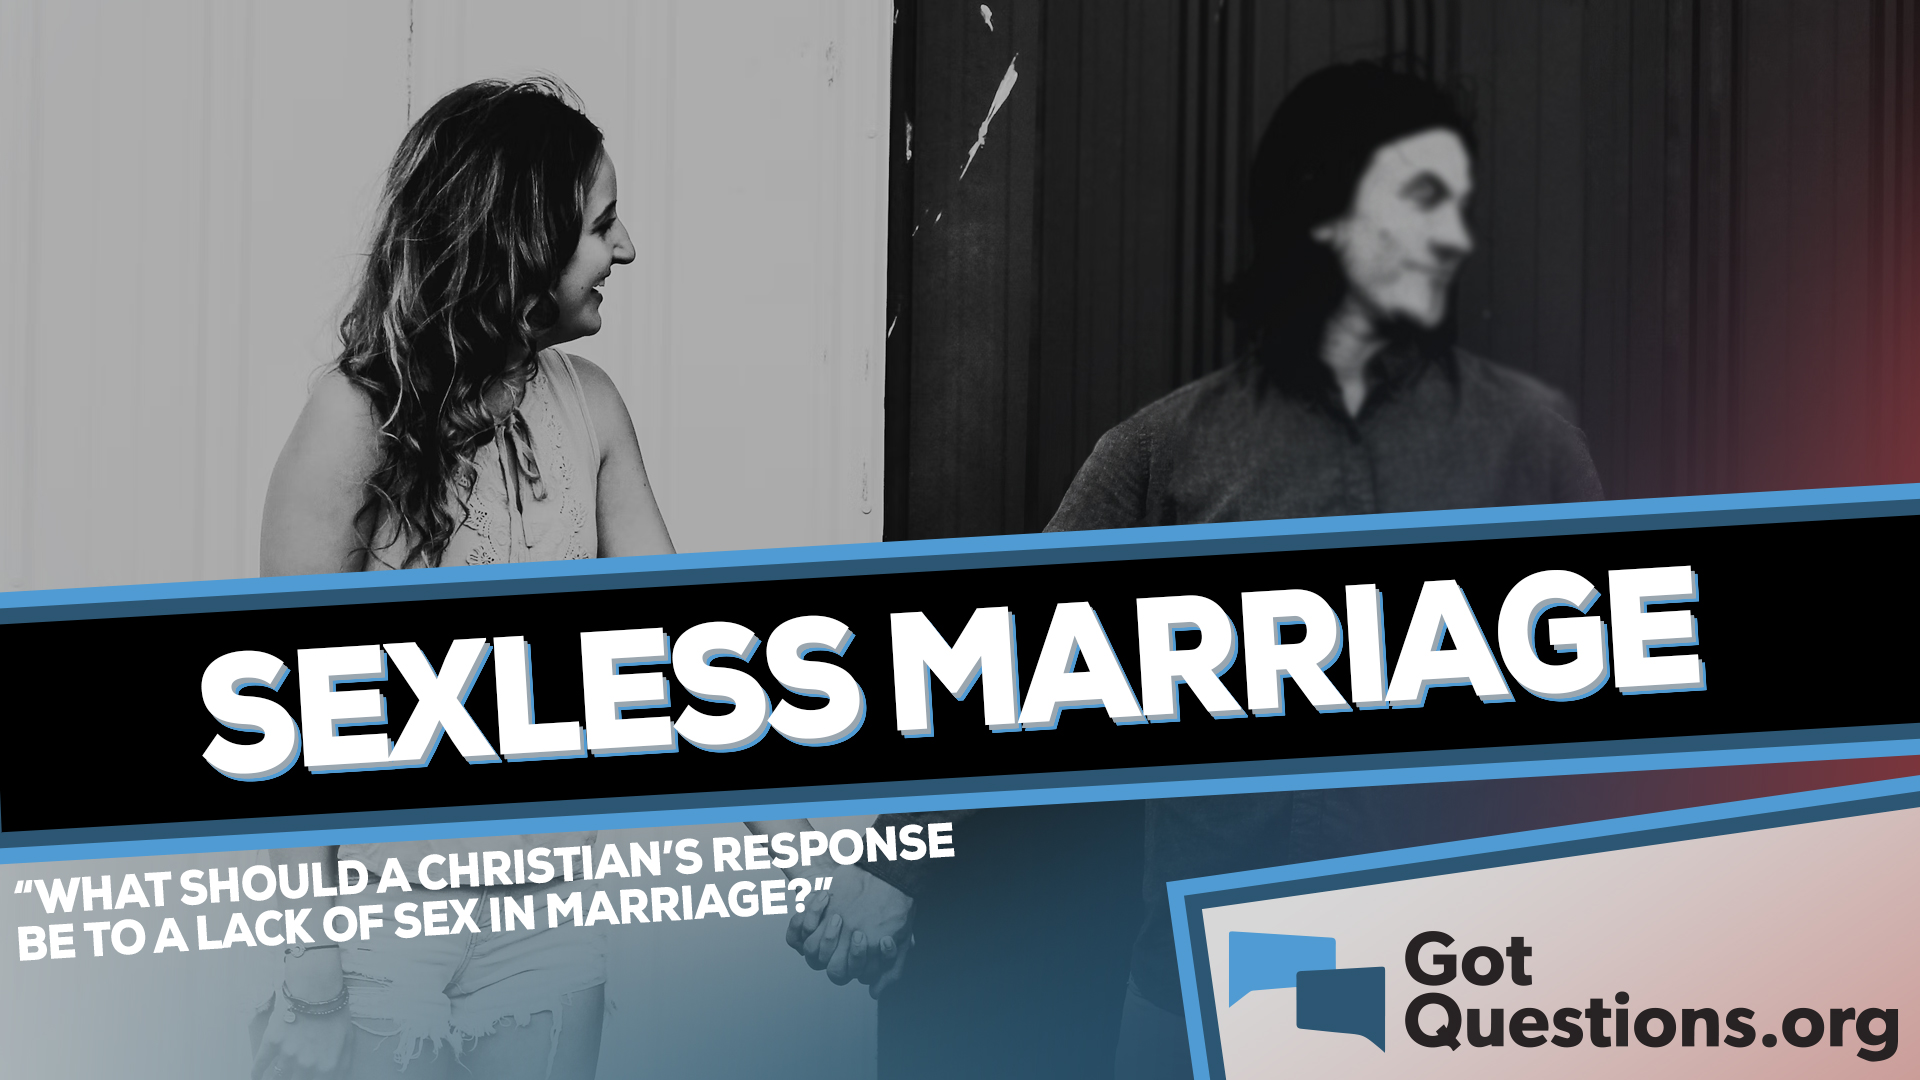 What should be a Christians response to a lack of sex in marriage (a sexless marriage)? GotQuestions photo